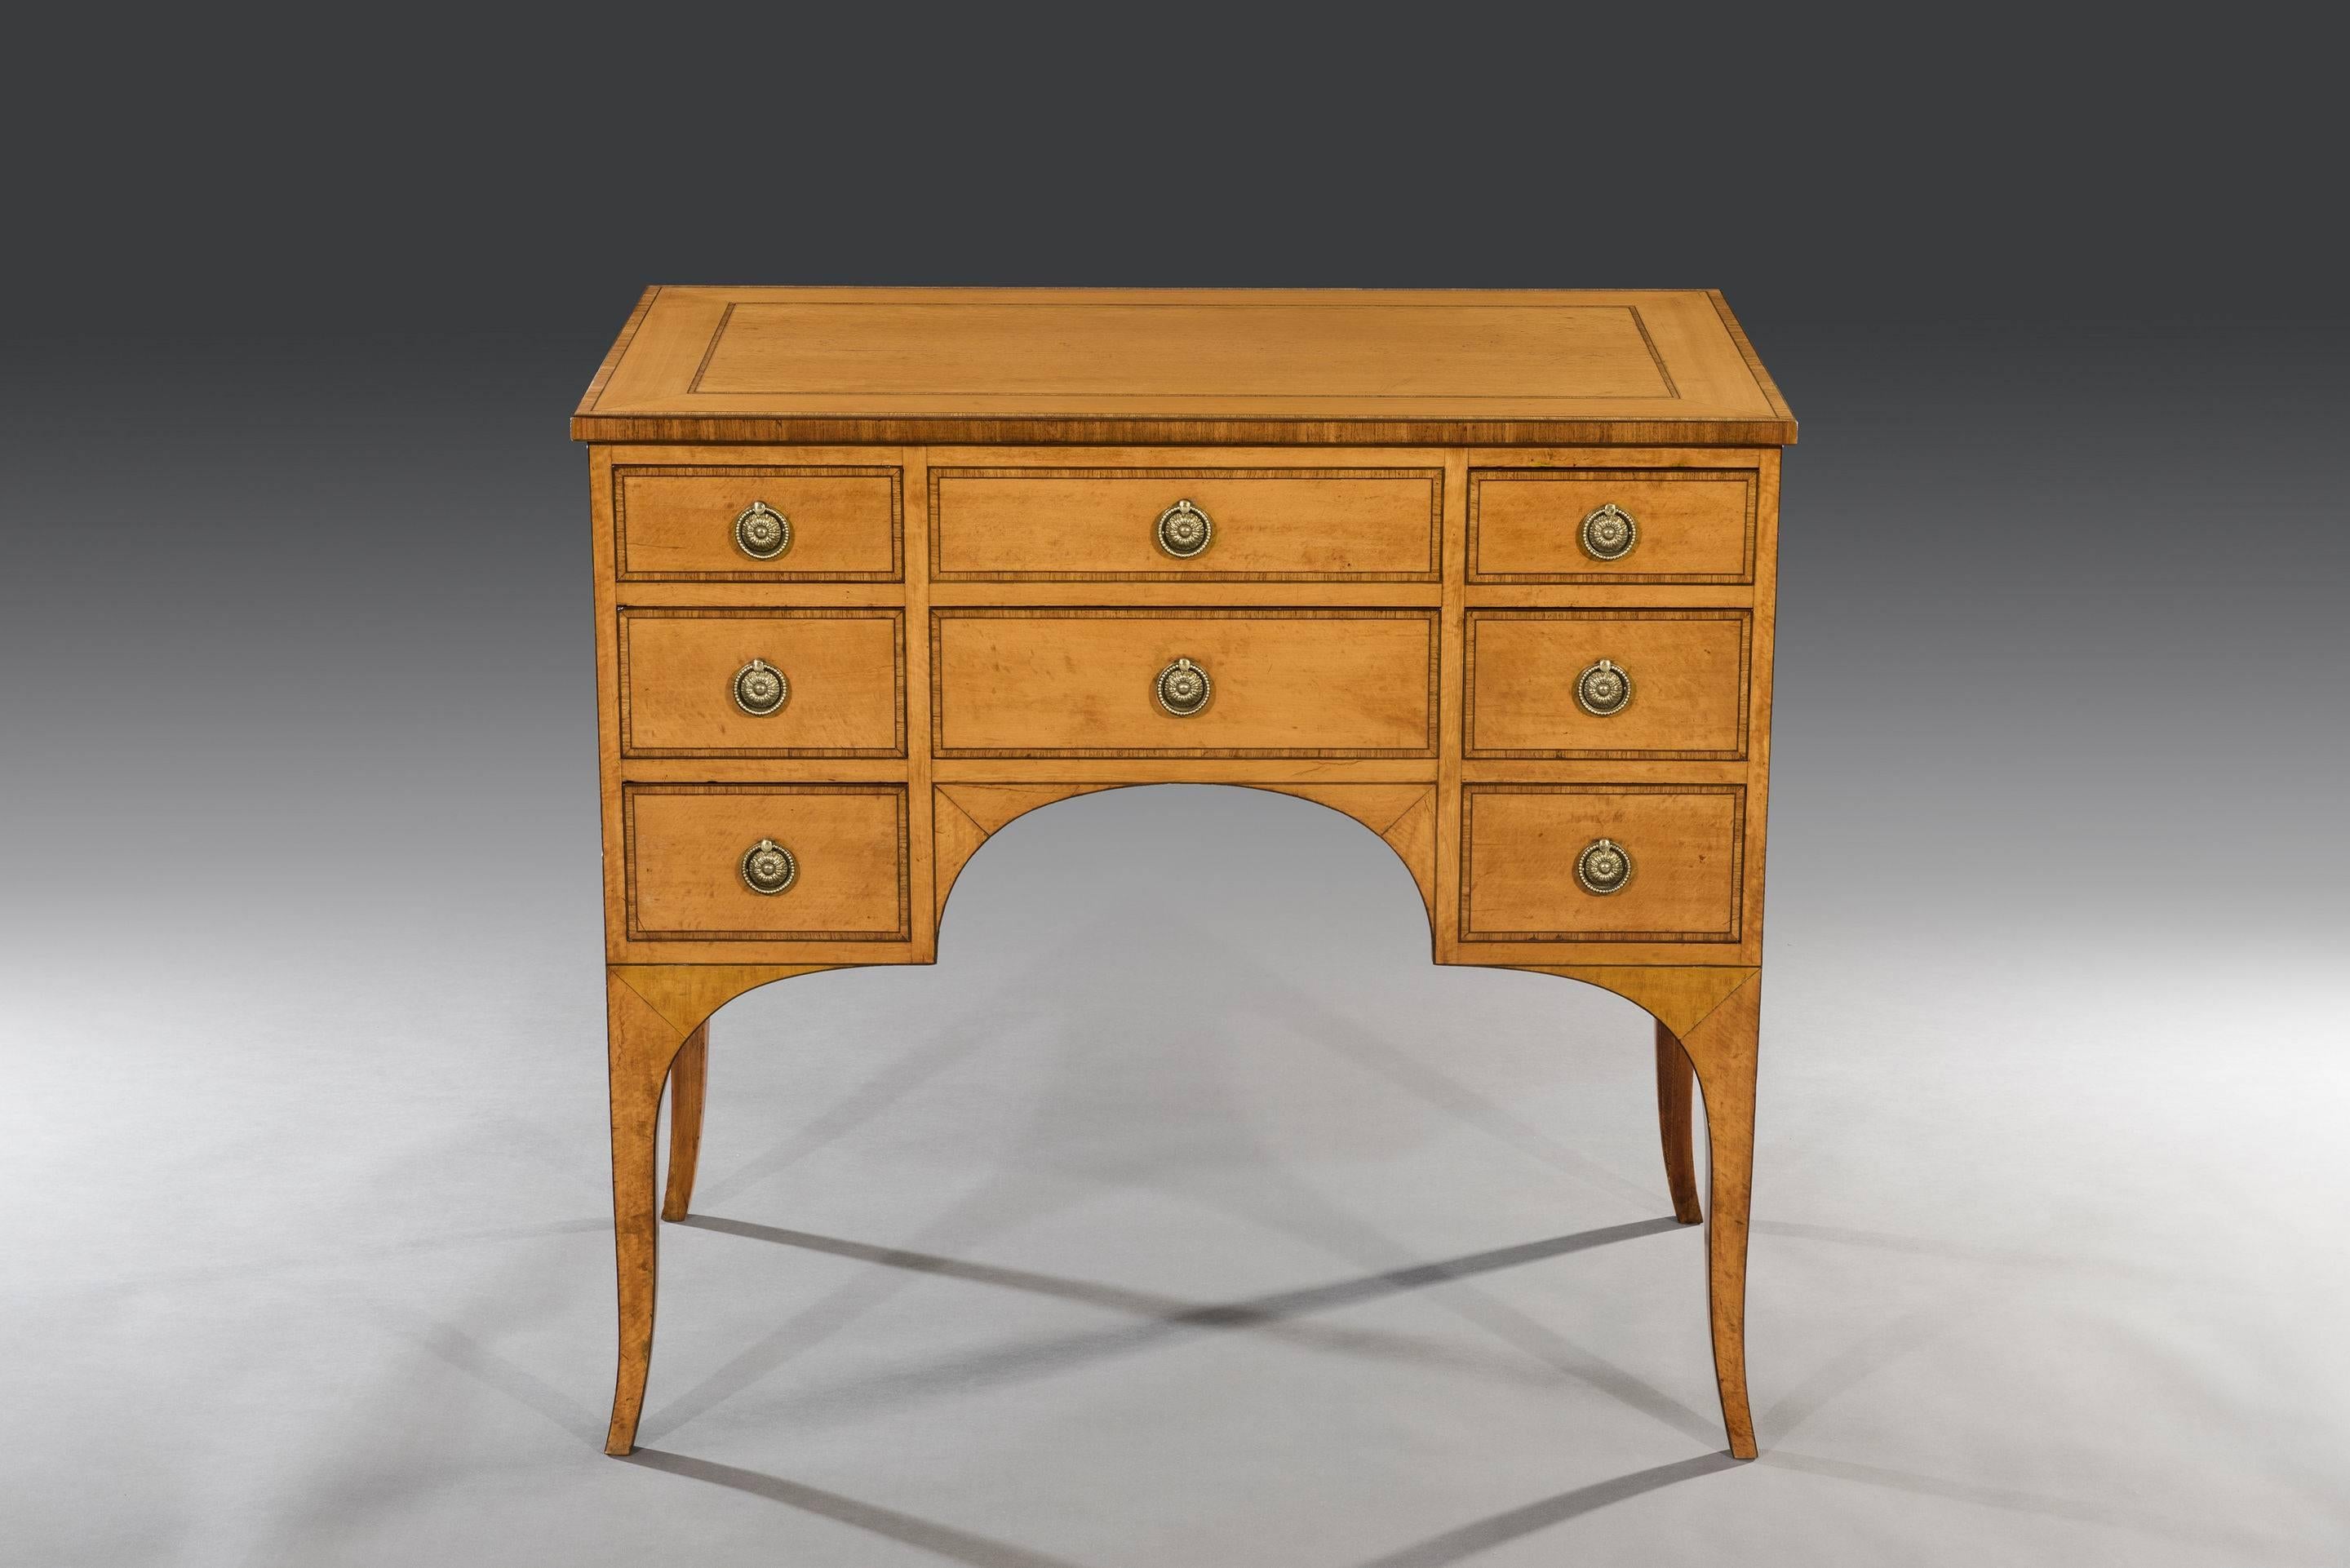 The inlaid rectangular top lifts up to reveal a dressing mirror and two compartments above two short and one long faux drawer. The four short and one long drawers arranged below are full length and mahogany lined. The drawers are fitted with the